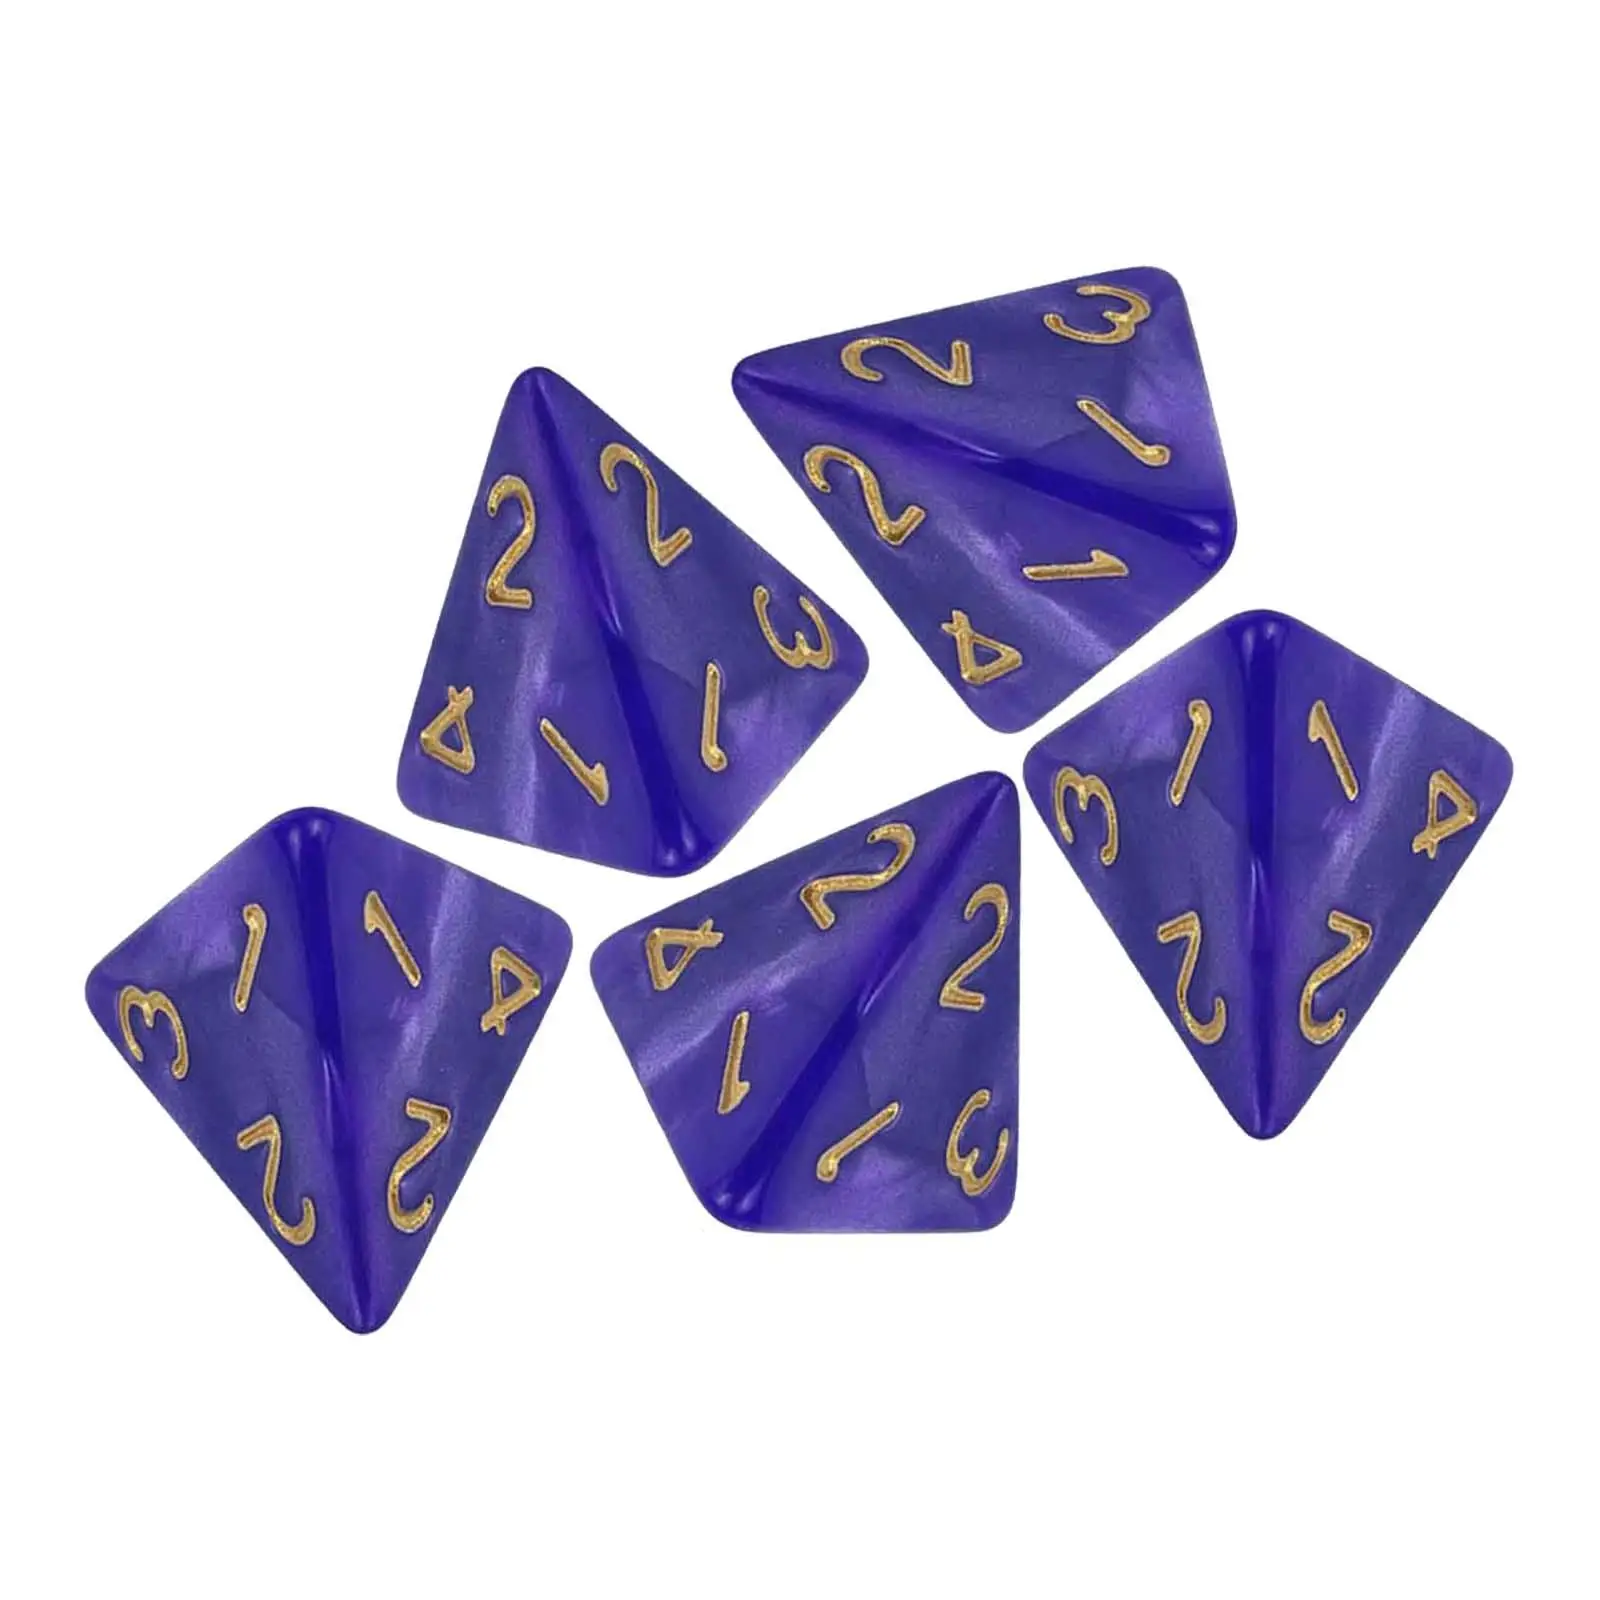 10x Polyhedral Dices Math Teaching Toys Dice Set for Bar Party Card Games